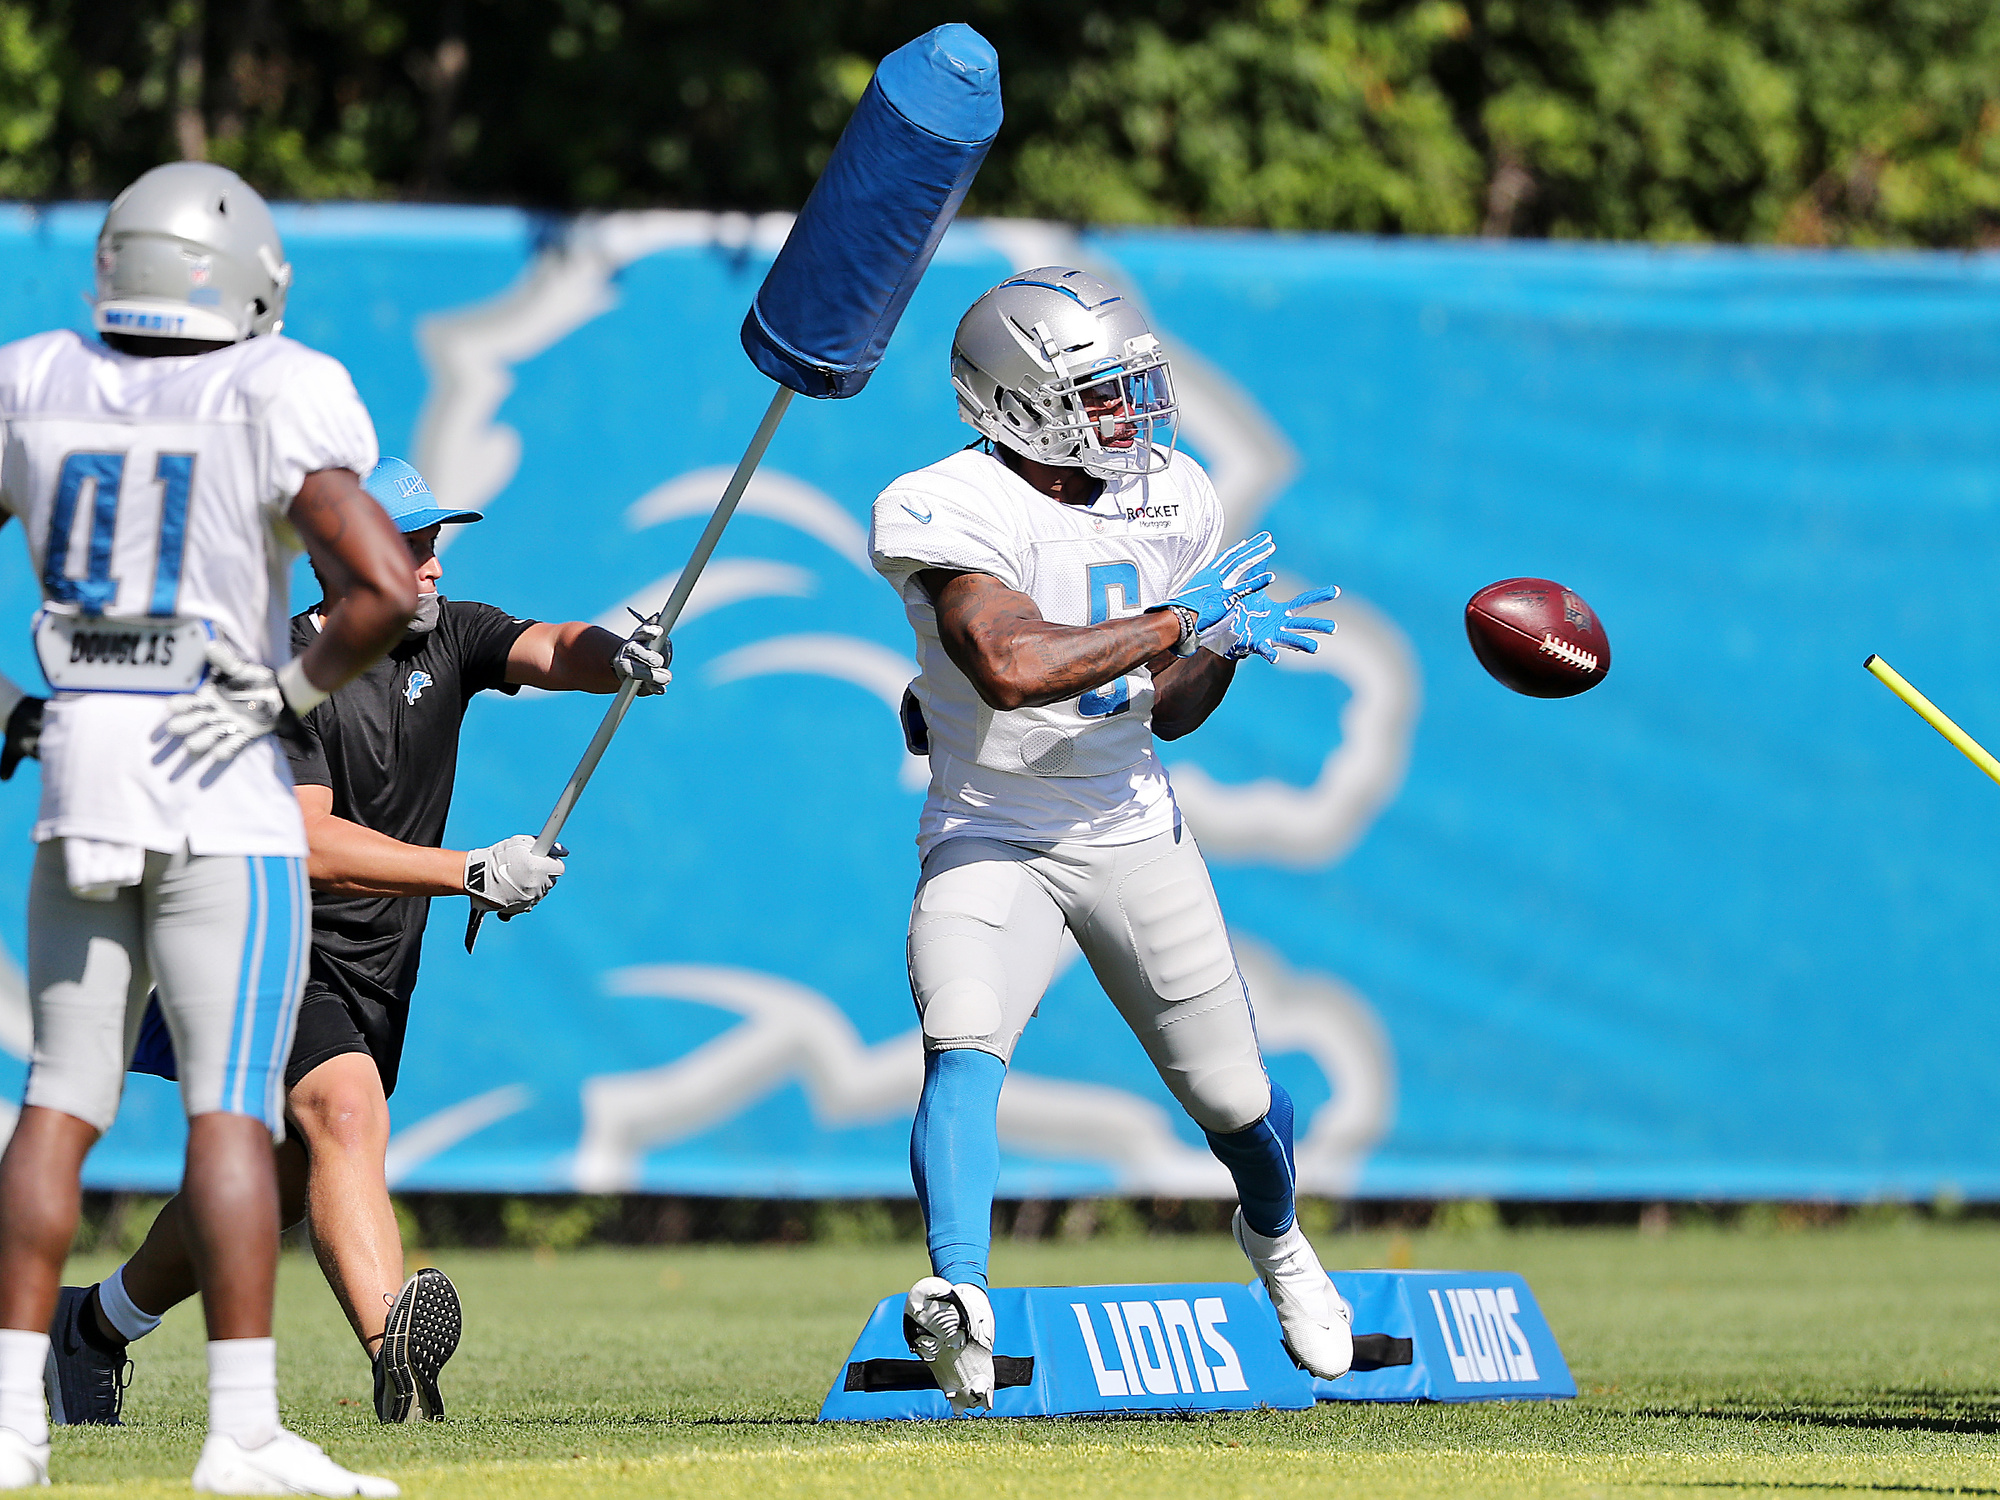 Expect the Lions to use D'Andre Swift in an Alvin Kamara-type role